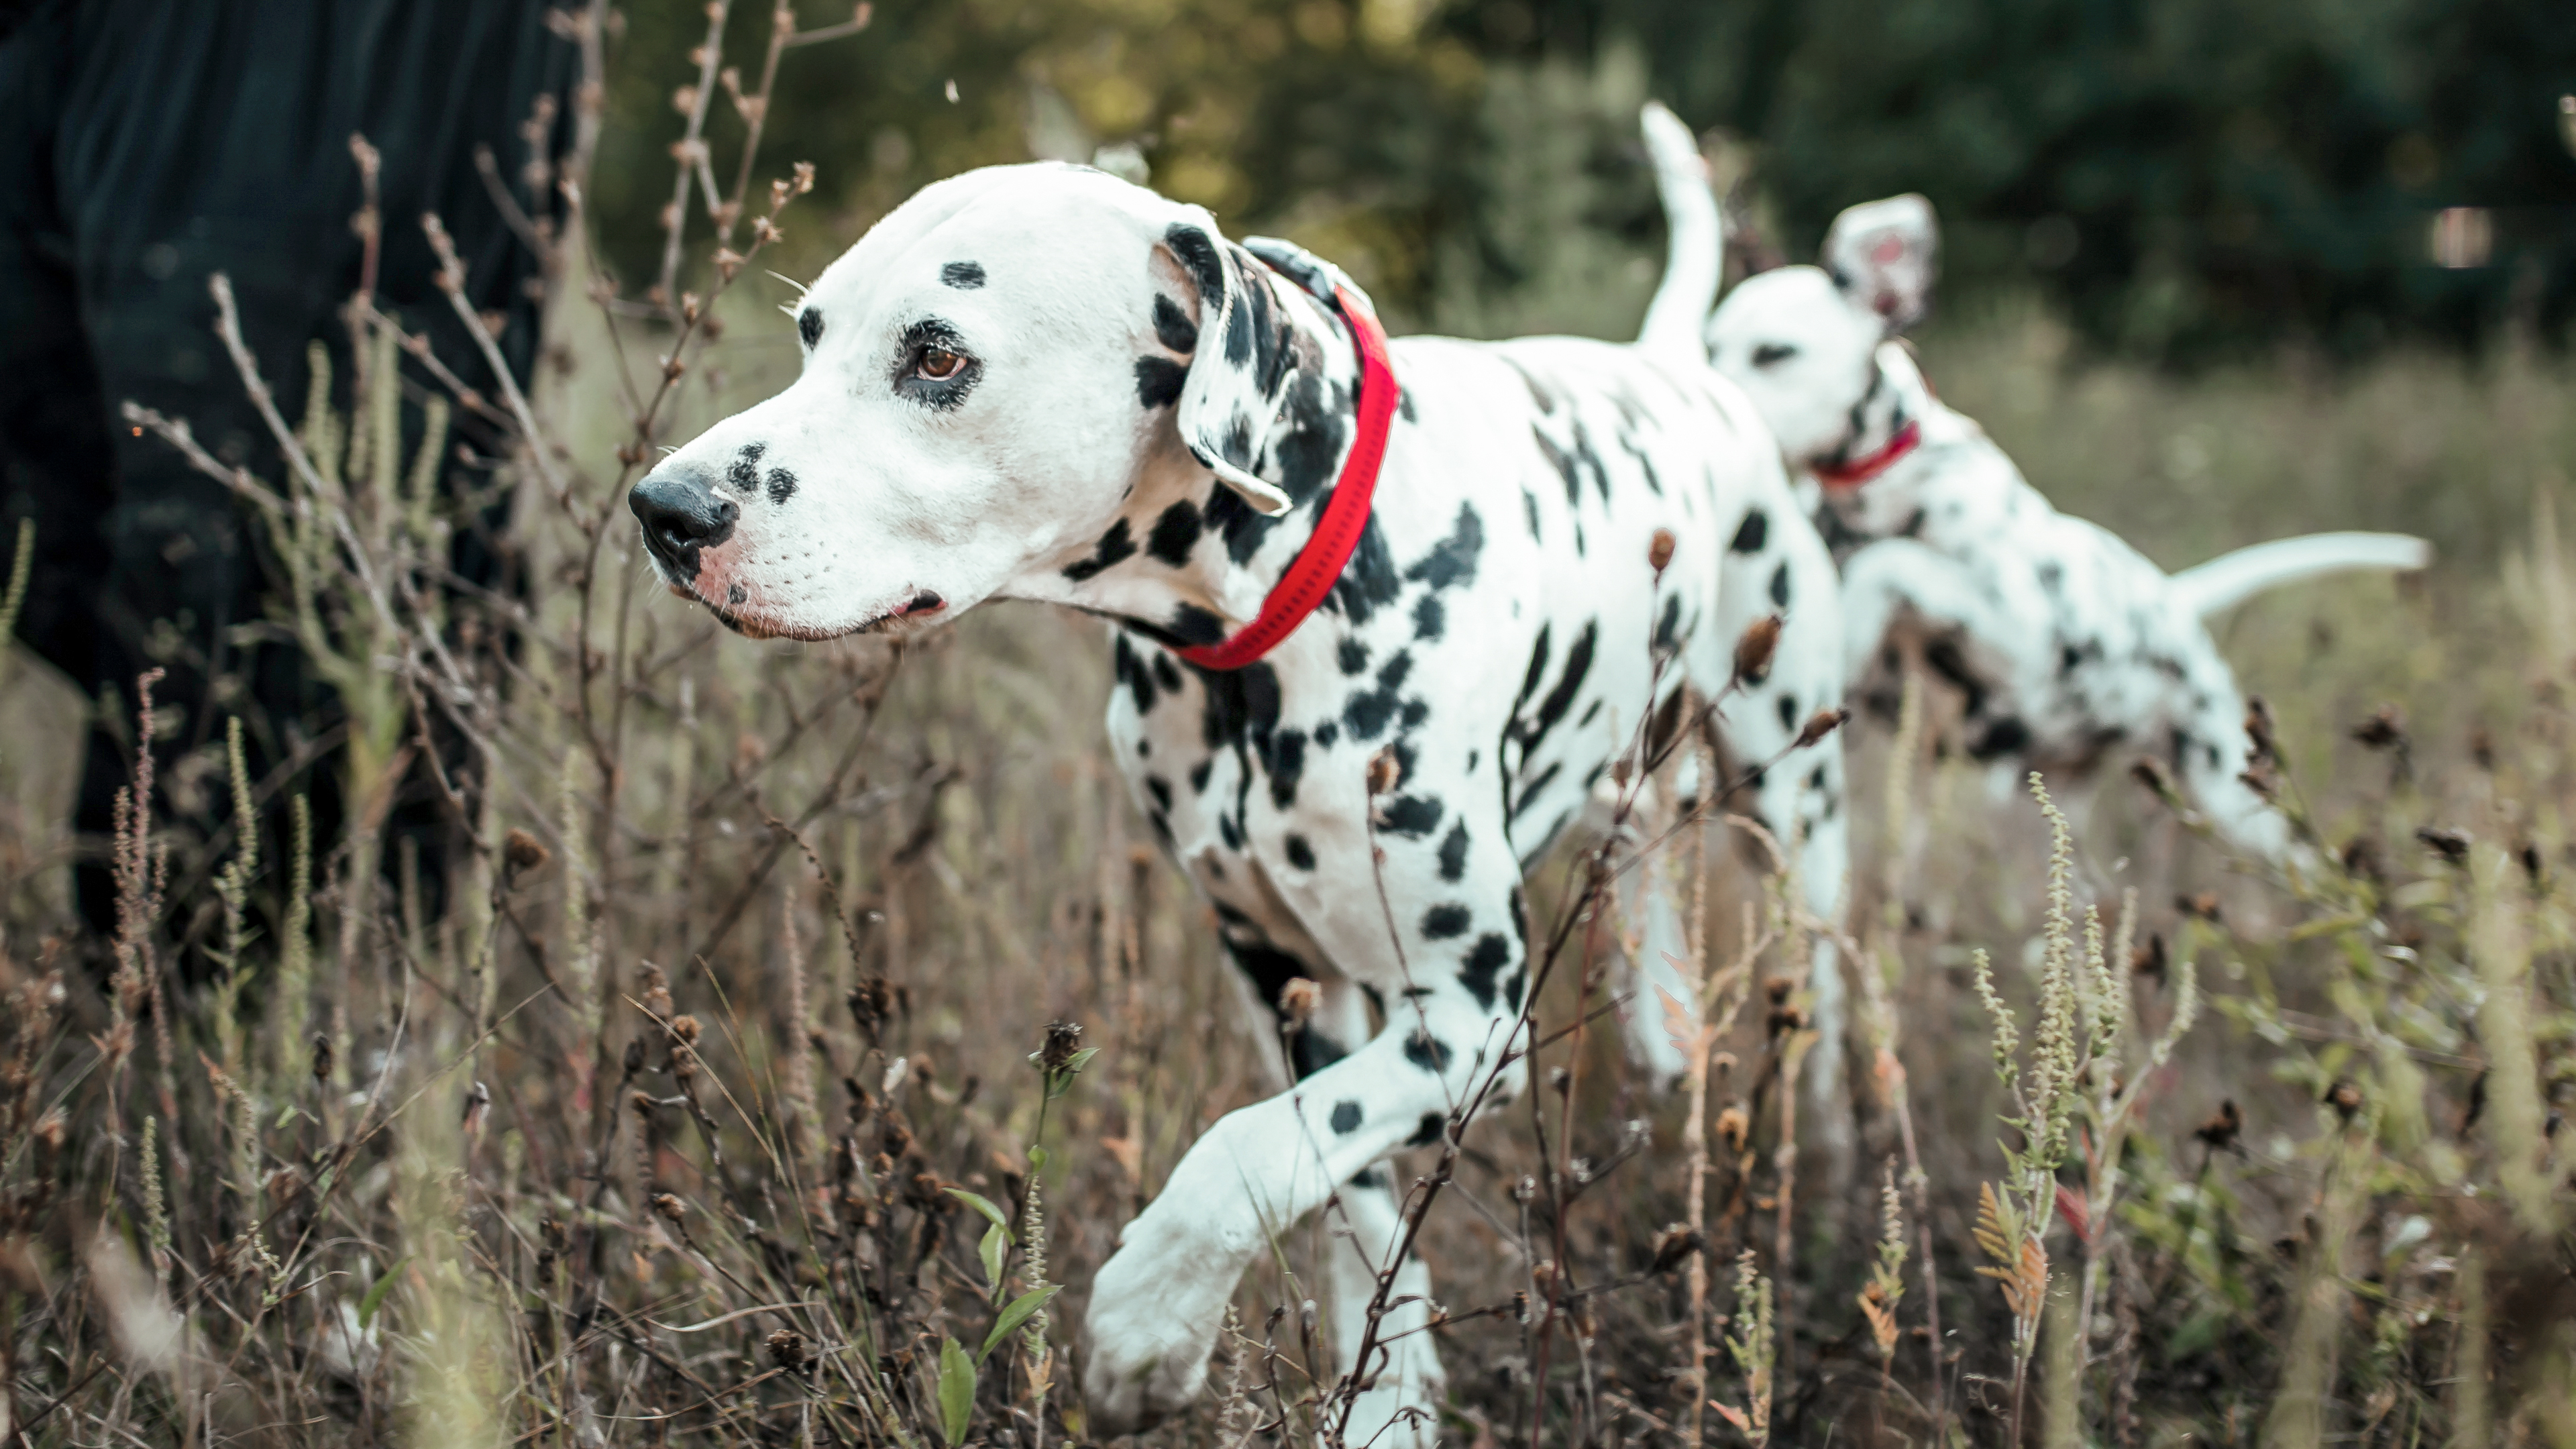 Young adult Dalmatians running through long grass and plants outdoors